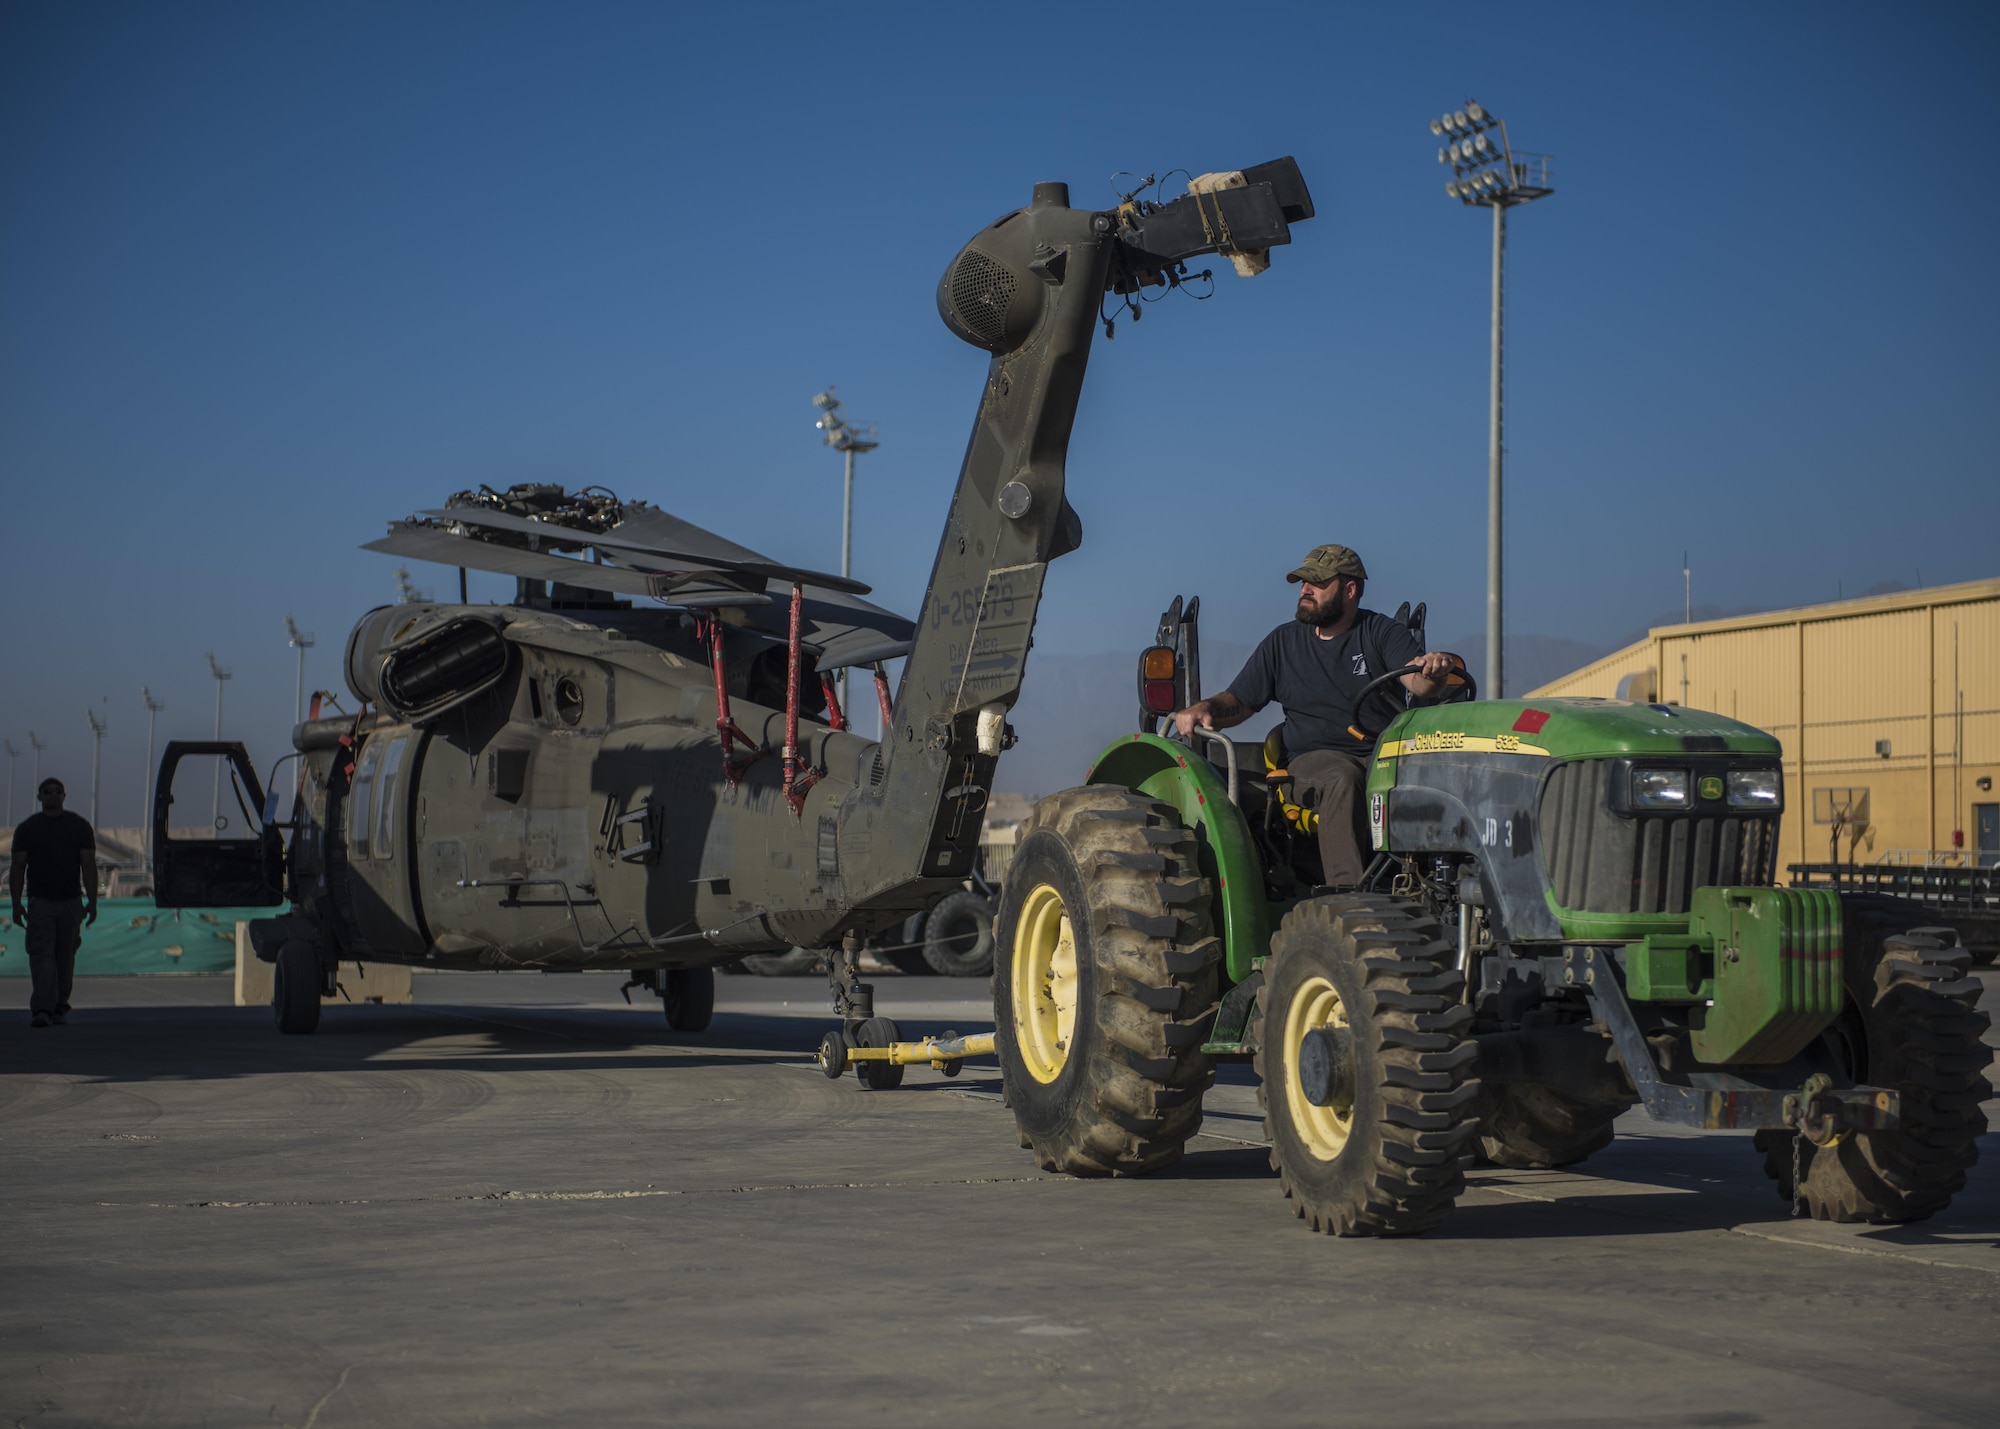 Anthony Fruge, Department of Defense contractor, uses a tractor to tow a Sikorsky UH-60 Blackhawk, Bagram Airfield, Afghanistan, Sept. 8, 2016. Airfield contractors work with aircrew members, such as loadmasters to load and unload helicopters off of aircraft when deploying and redeploying back to home stations. (U.S. Air Force photo by Senior Airman Justyn M. Freeman)